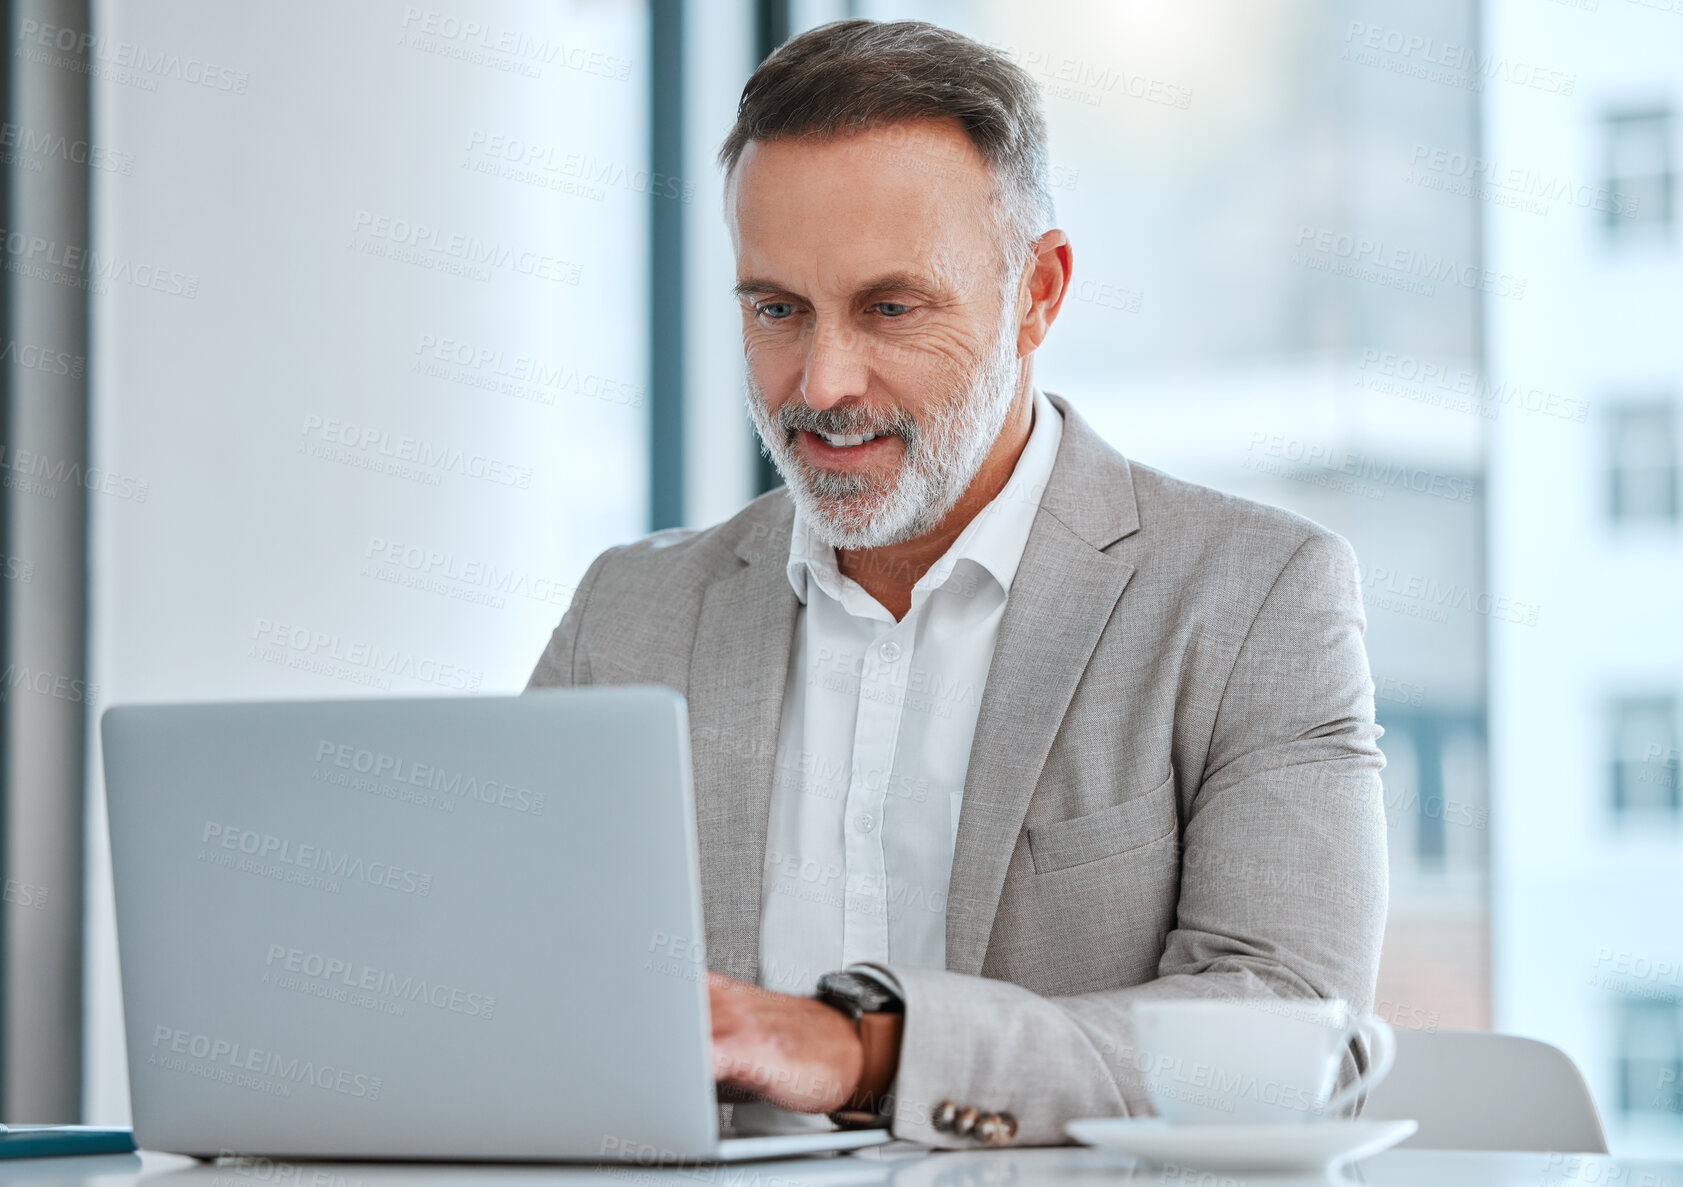 Buy stock photo Shot of a mature man using a computer at work in a office